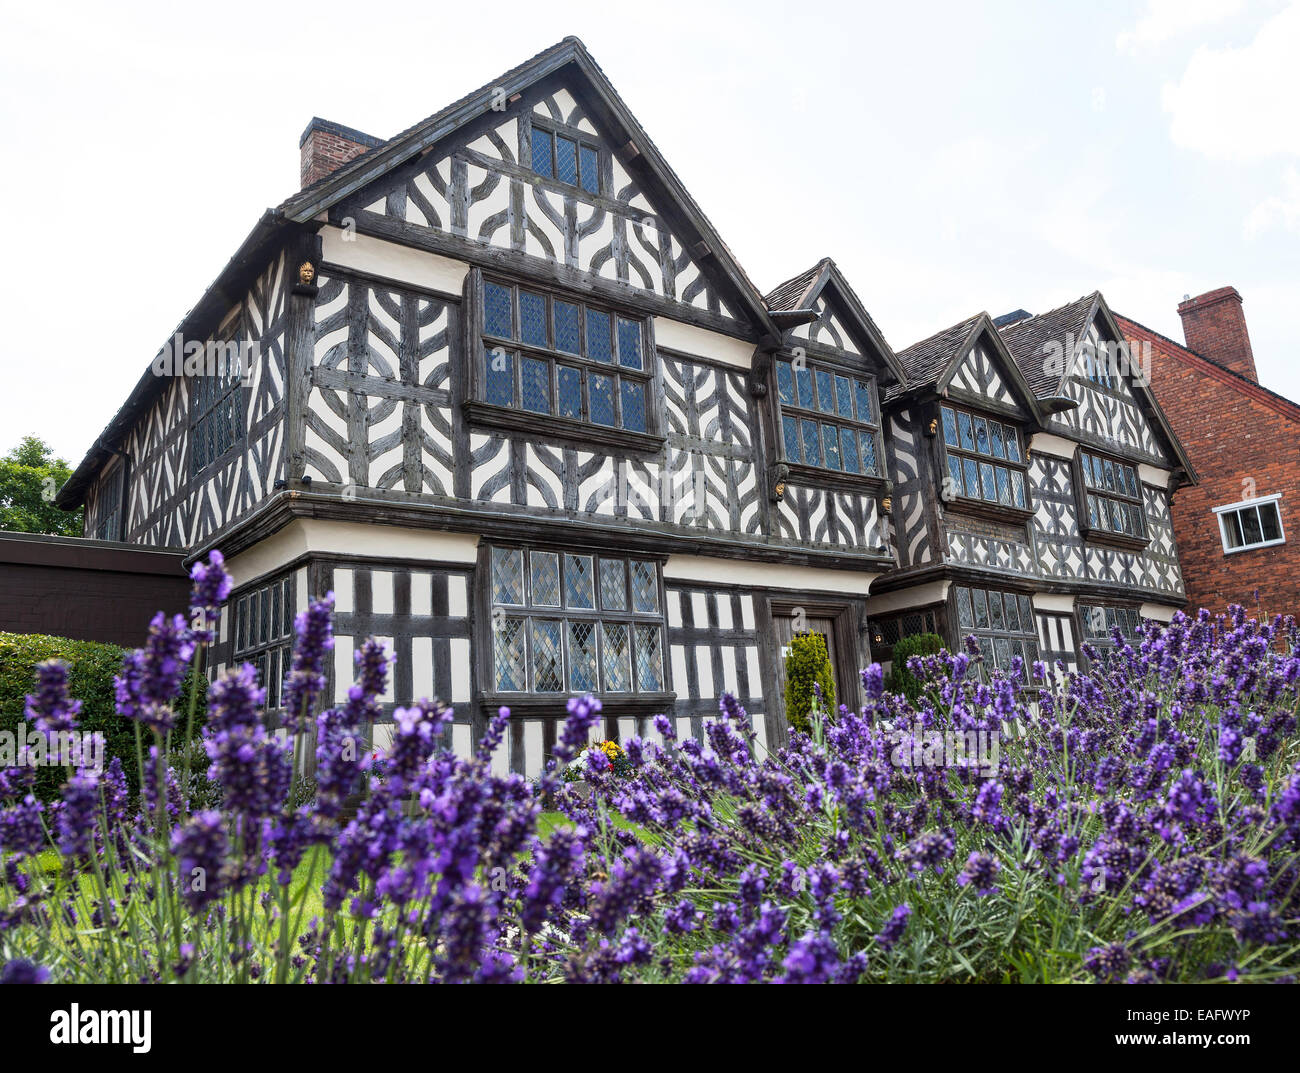 Churche's Mansion is a timber-framed, black-and-white Elizabethan mansion house at Hospital Street in Nantwich, Cheshire, England, UK Stock Photo